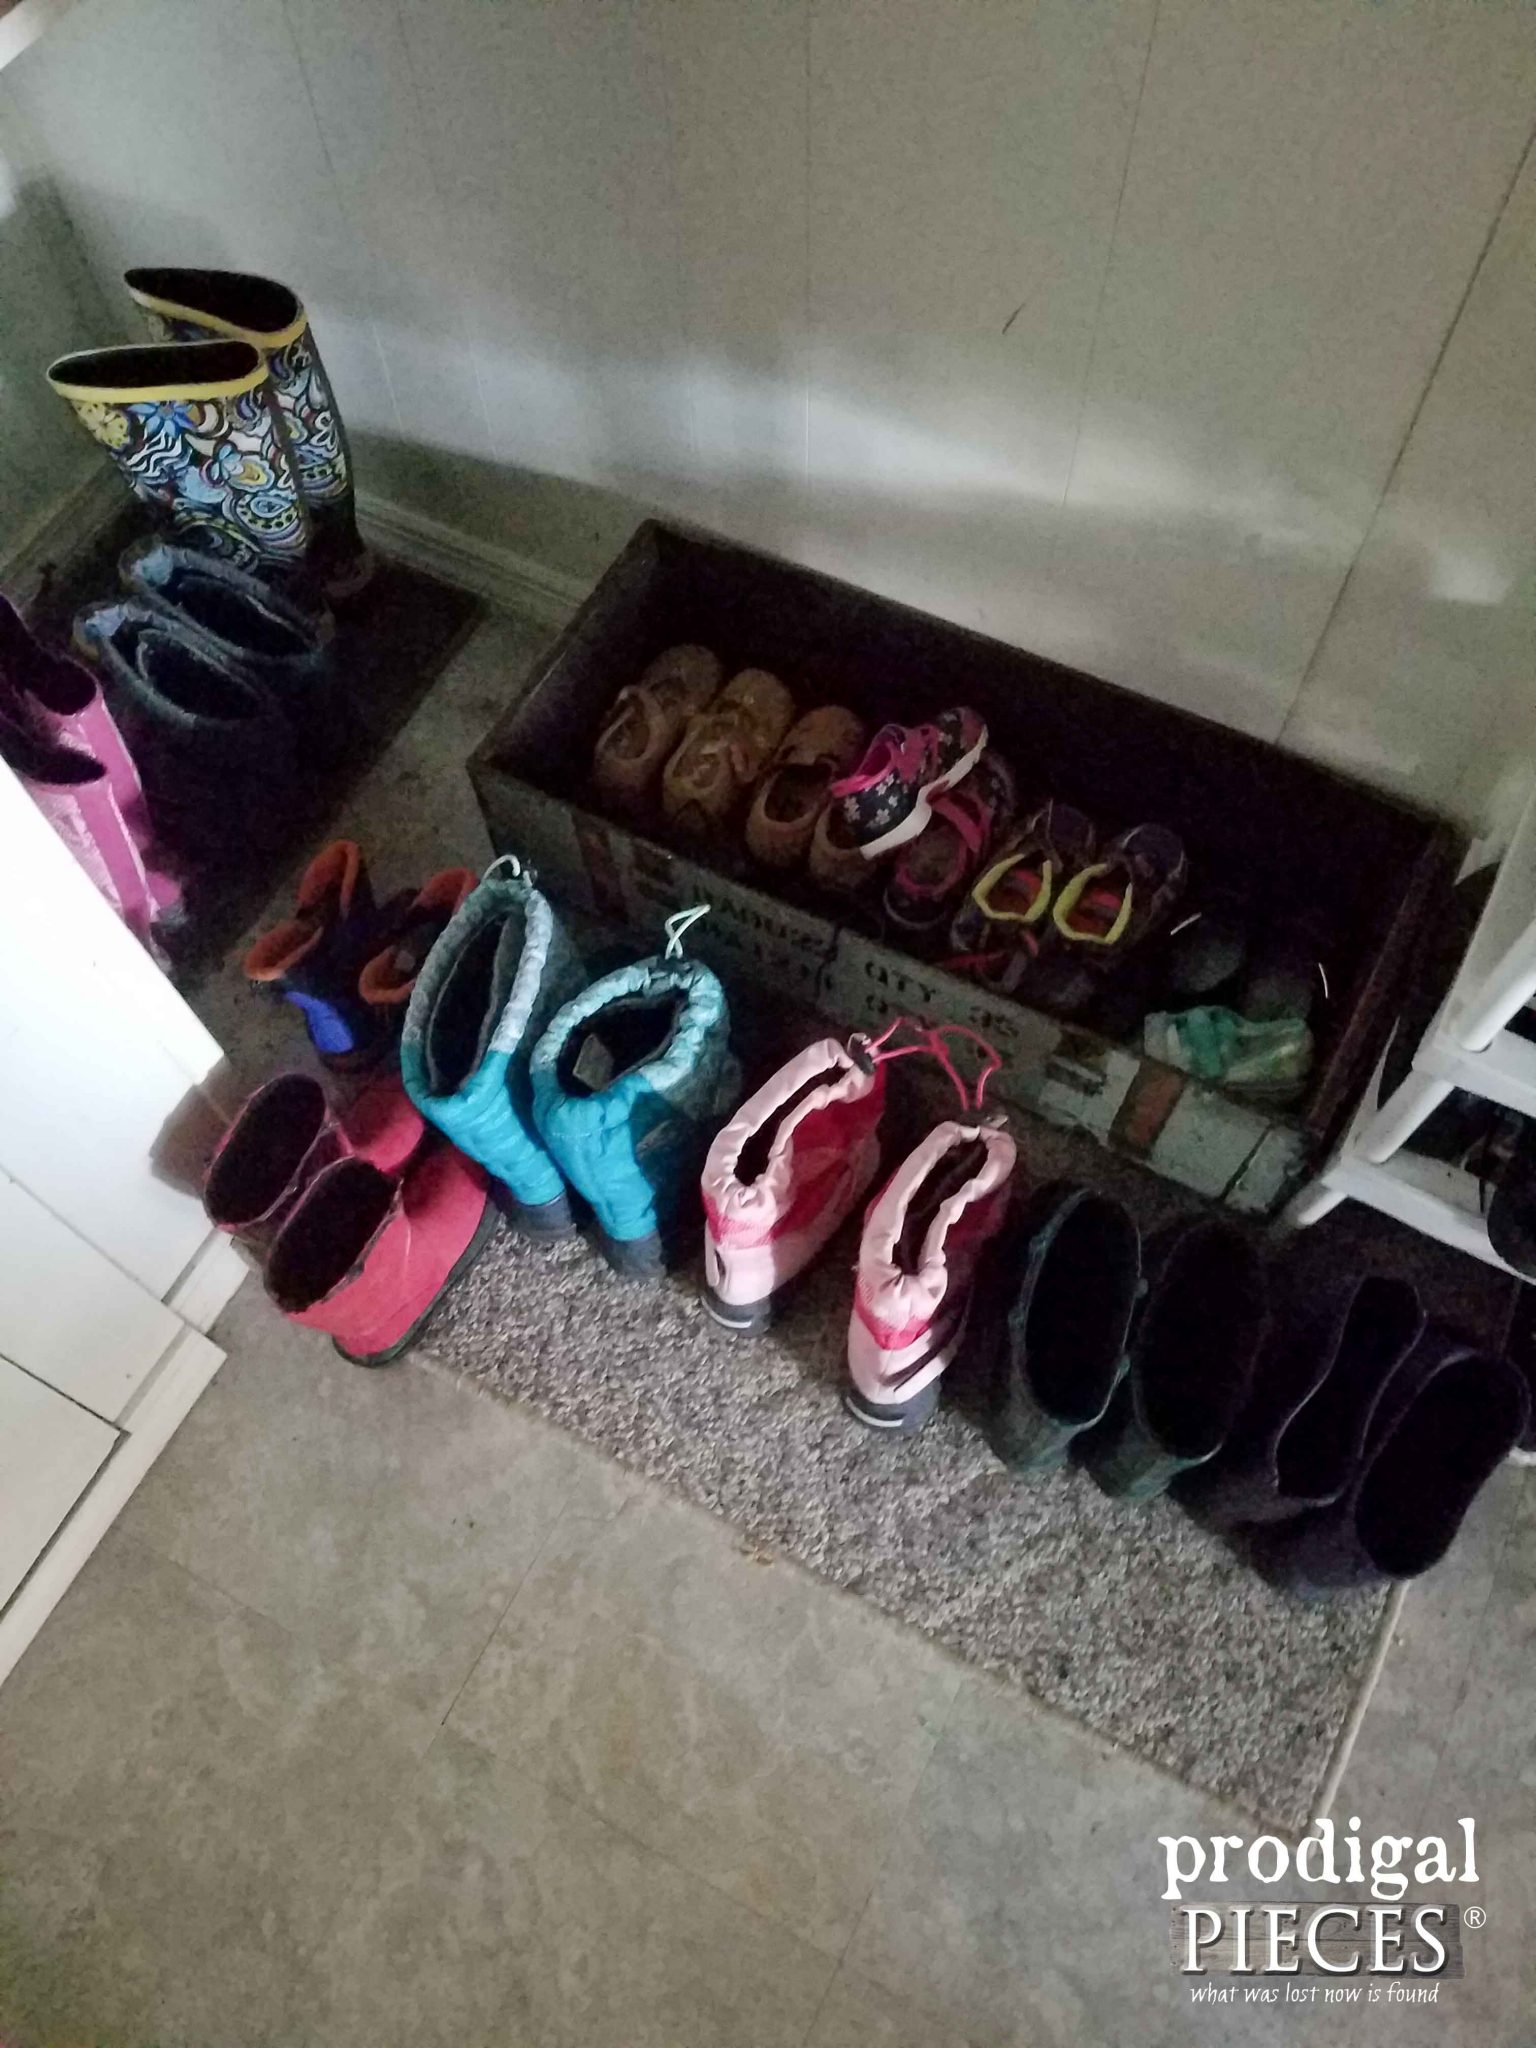 Rubber Boots and Shoes in Mudroom | Prodigal Pieces | prodigalpieces.com